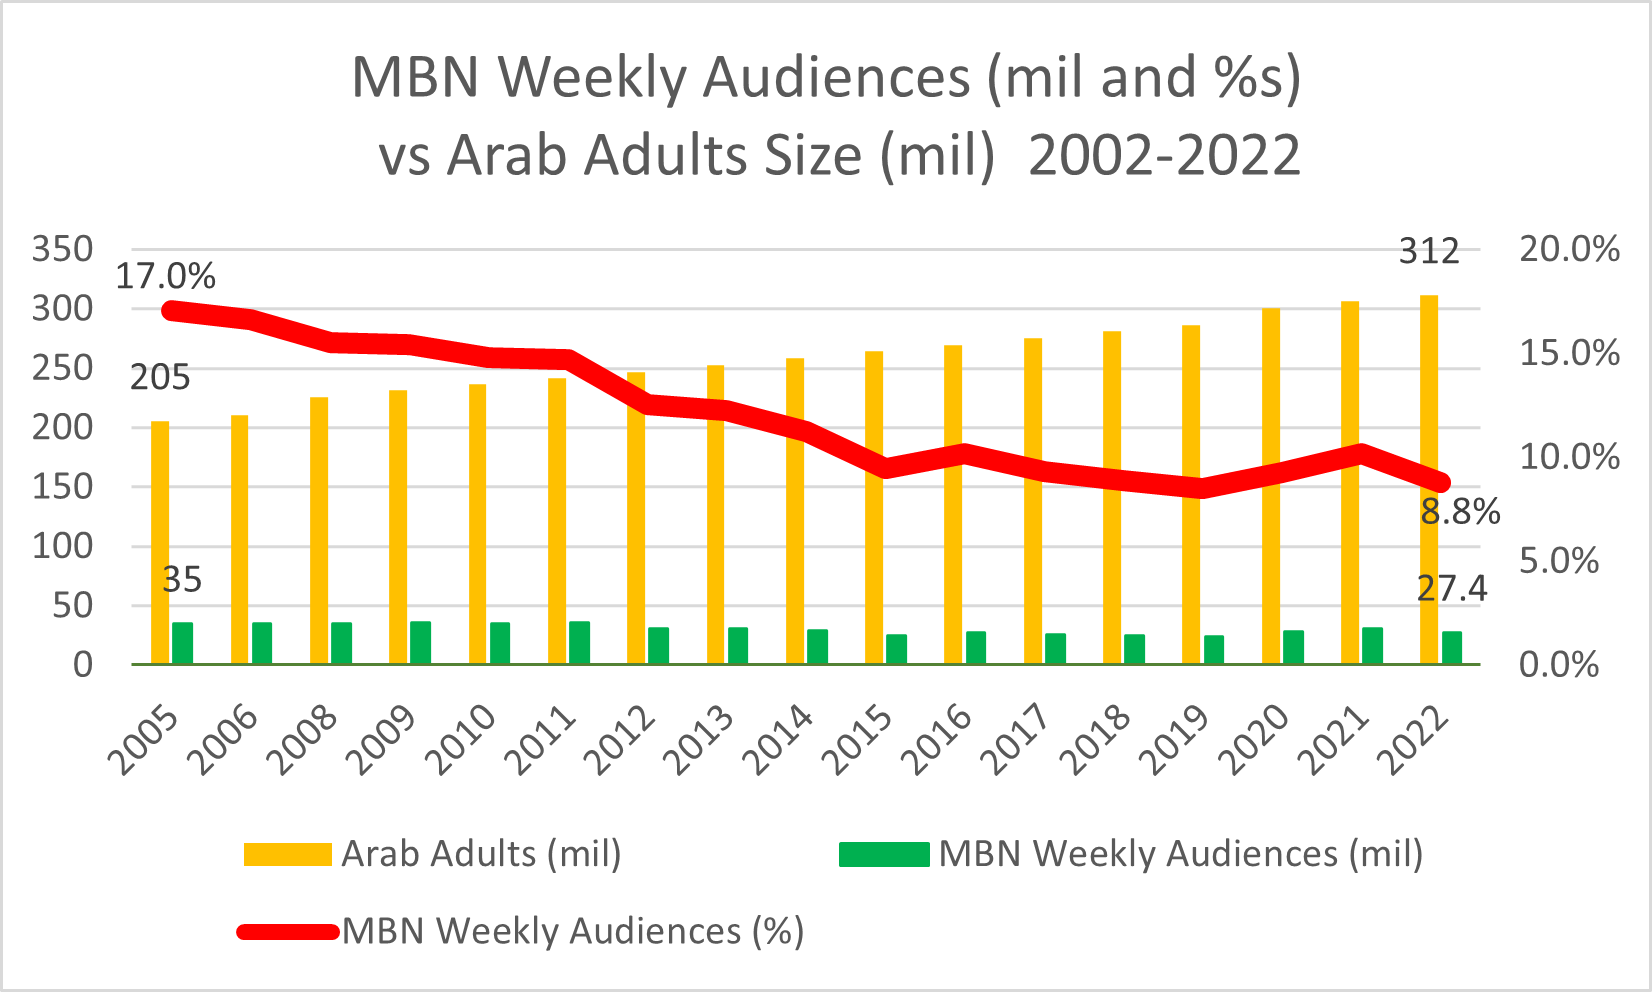 Chart showing MBN weekly audiences vs Arab adults size, 2002-2022